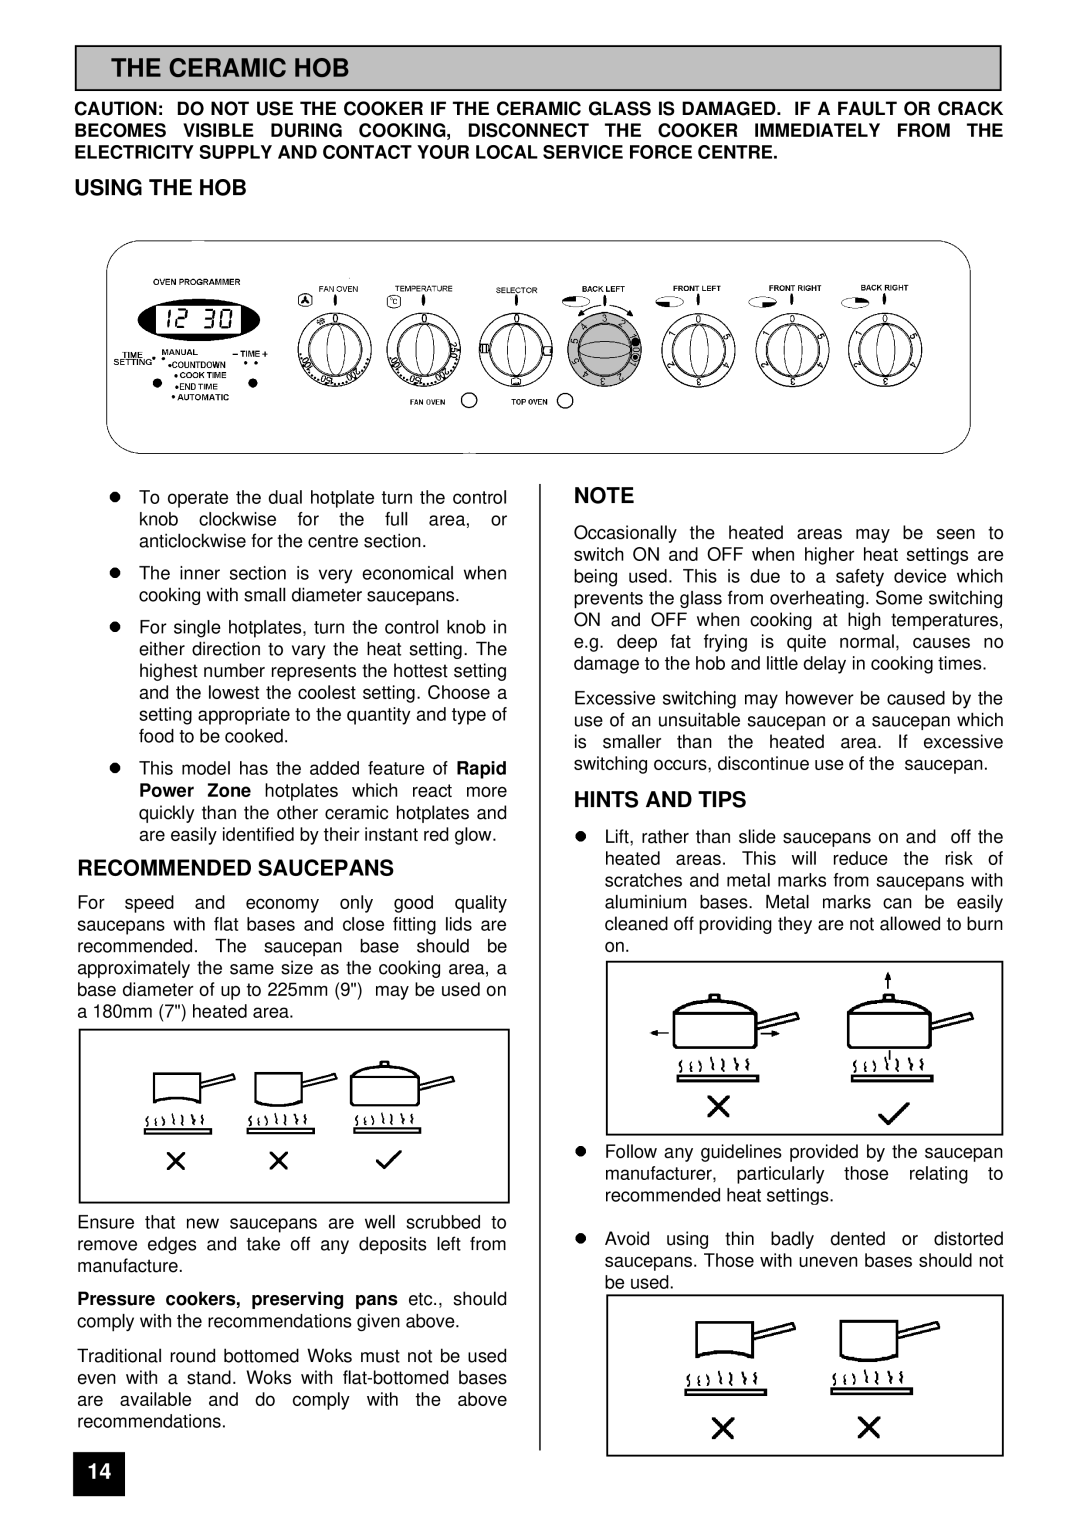 Tricity Bendix RE60DC, RE60 SS installation instructions Ceramic HOB, Using the HOB, Recommended Saucepans 